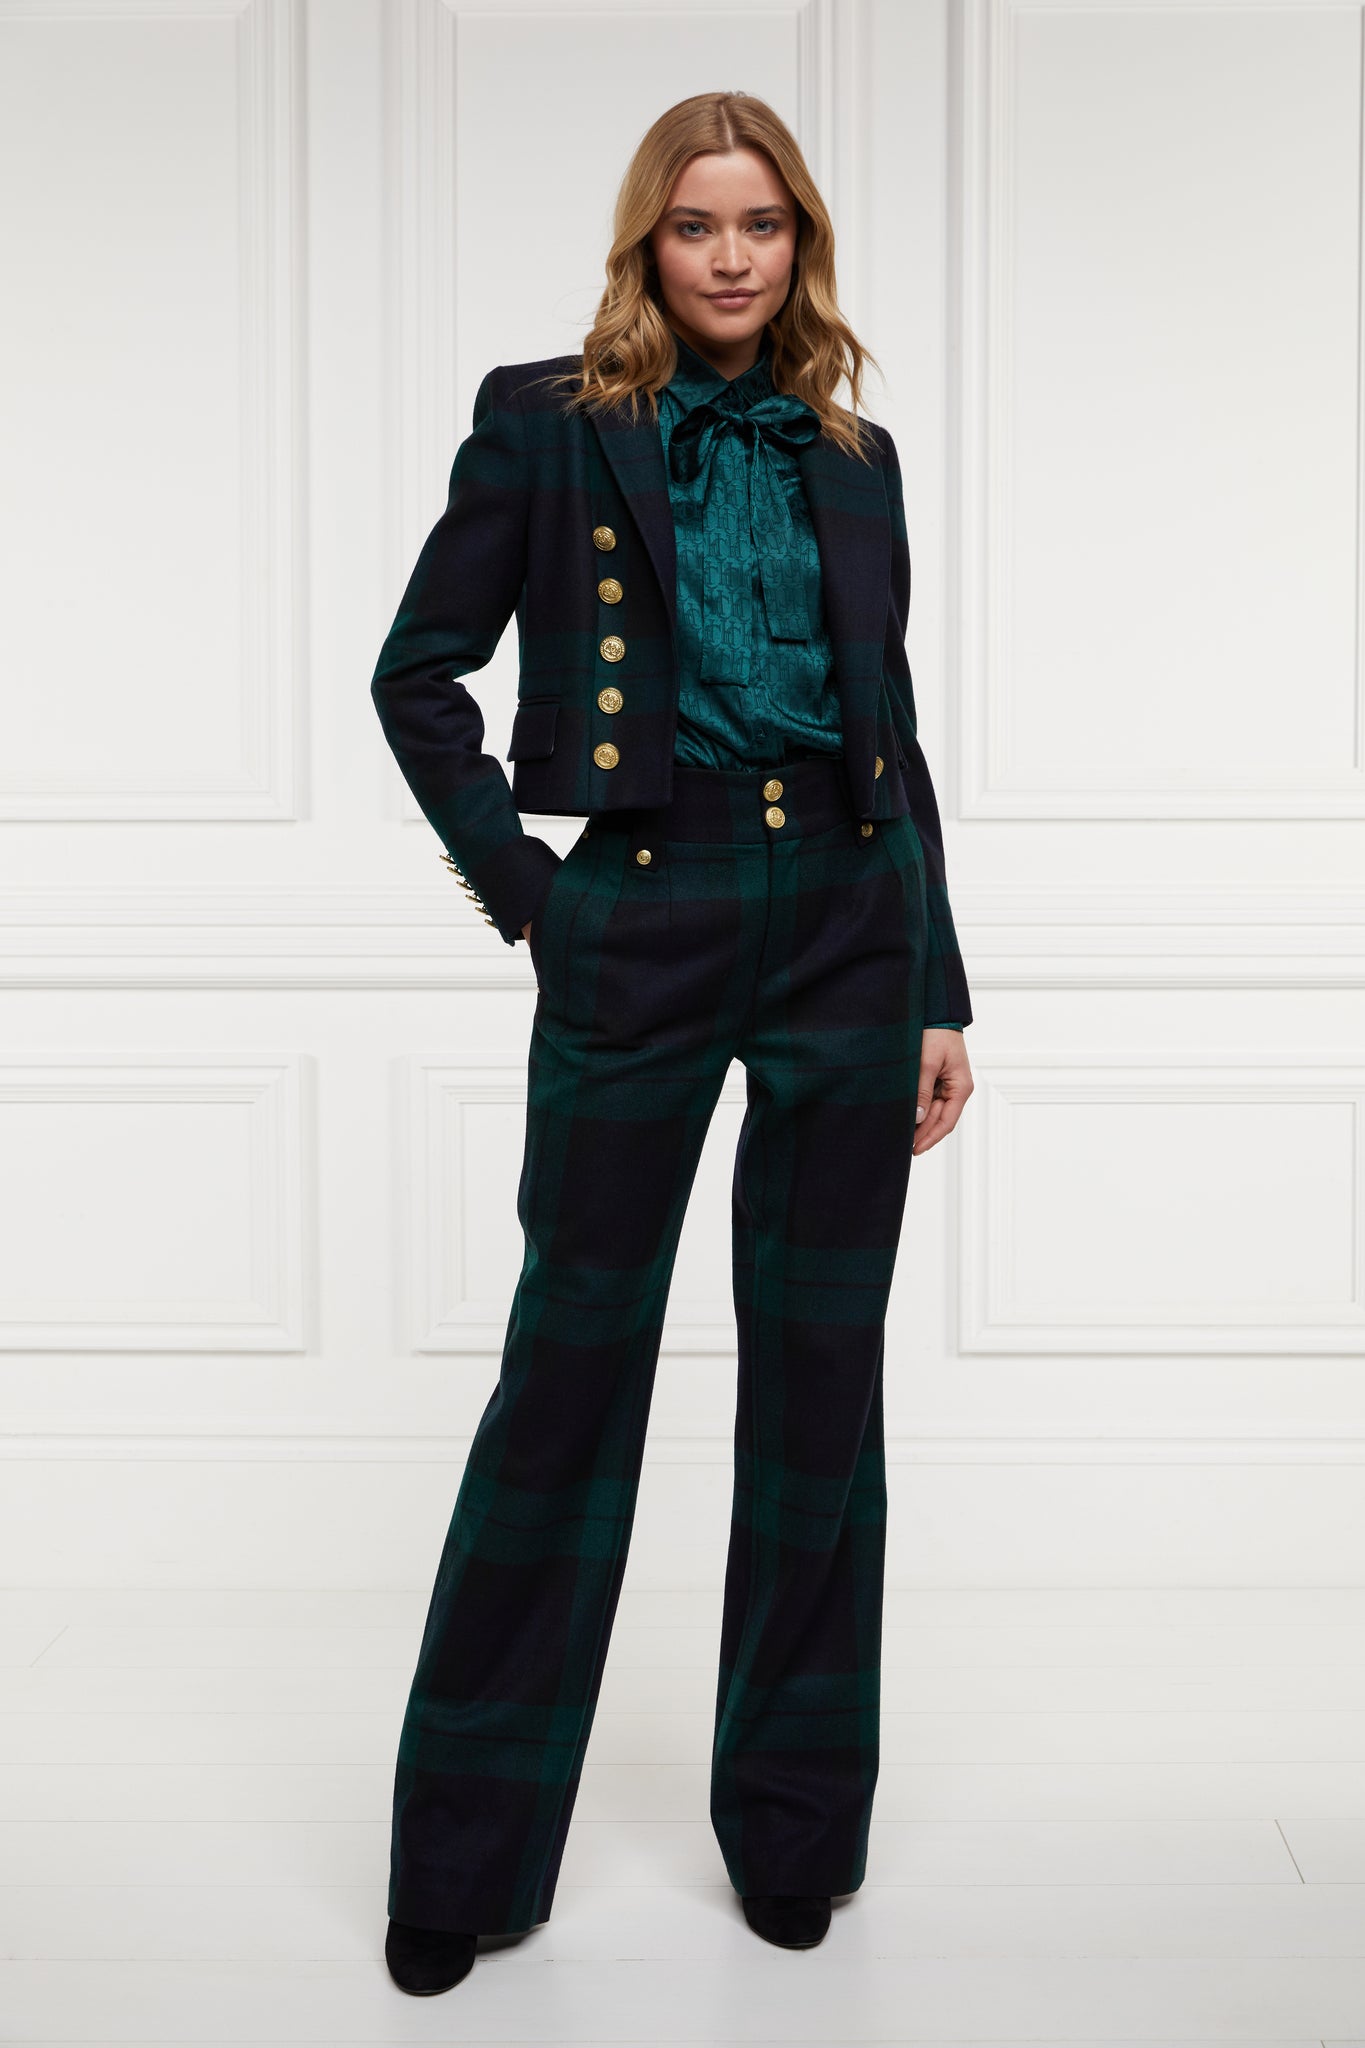 British made tailored cropped jacket in navy and green blackwatch tarten with welt pockets and gold button detail down the front and on sleeves worn with green silk shirt and tailored trousers in blackwatch